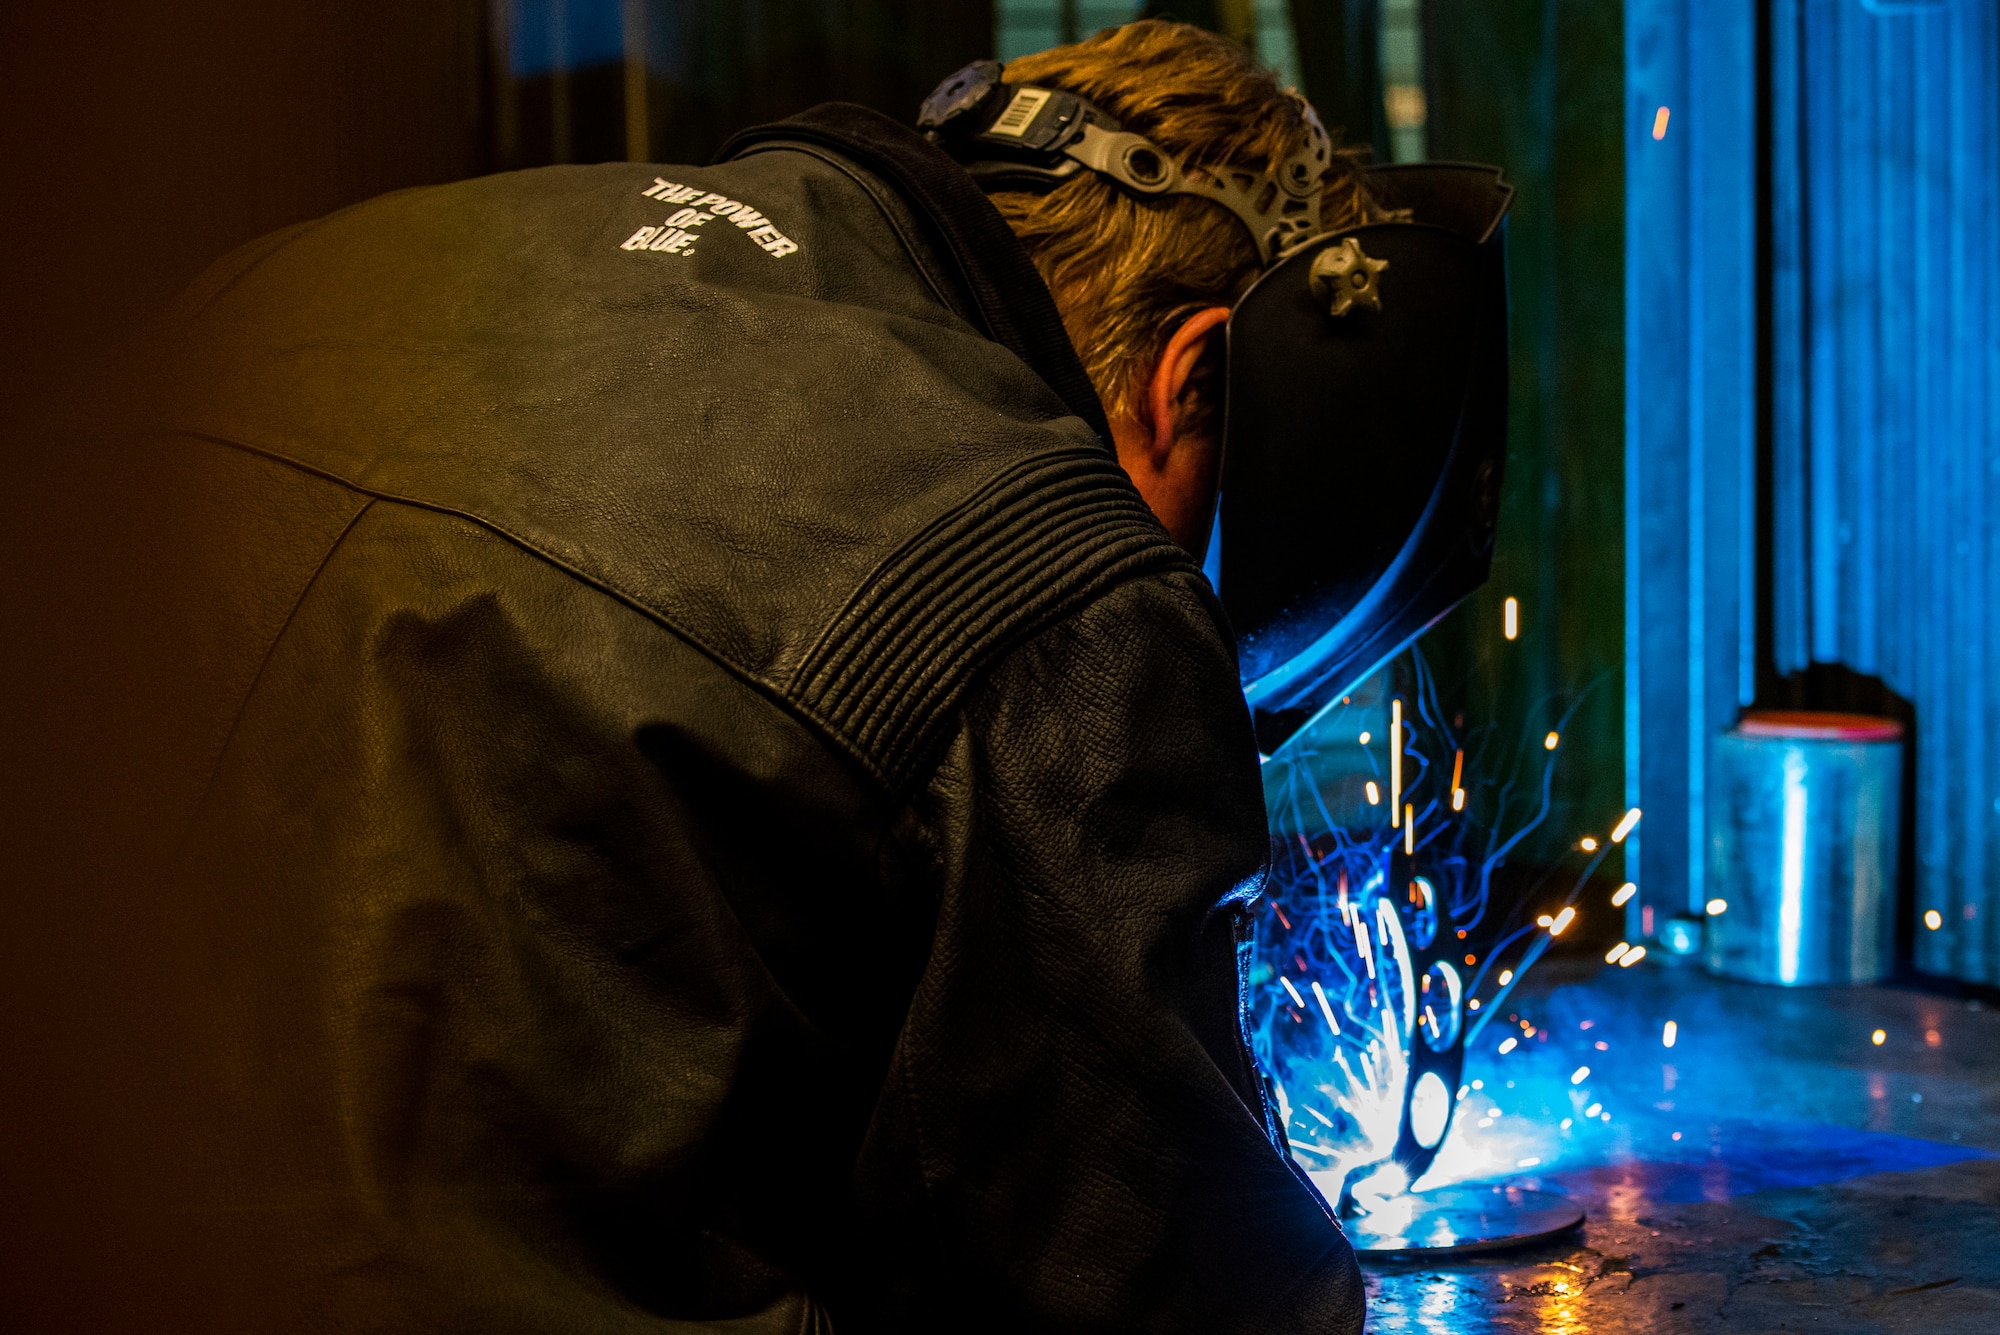 Travis Harris, 583rd Missile Maintenance Squadron shop mechanic, welds two pieces of metal together April 20, 2021 at Malmstrom Air Force Base, Mont.